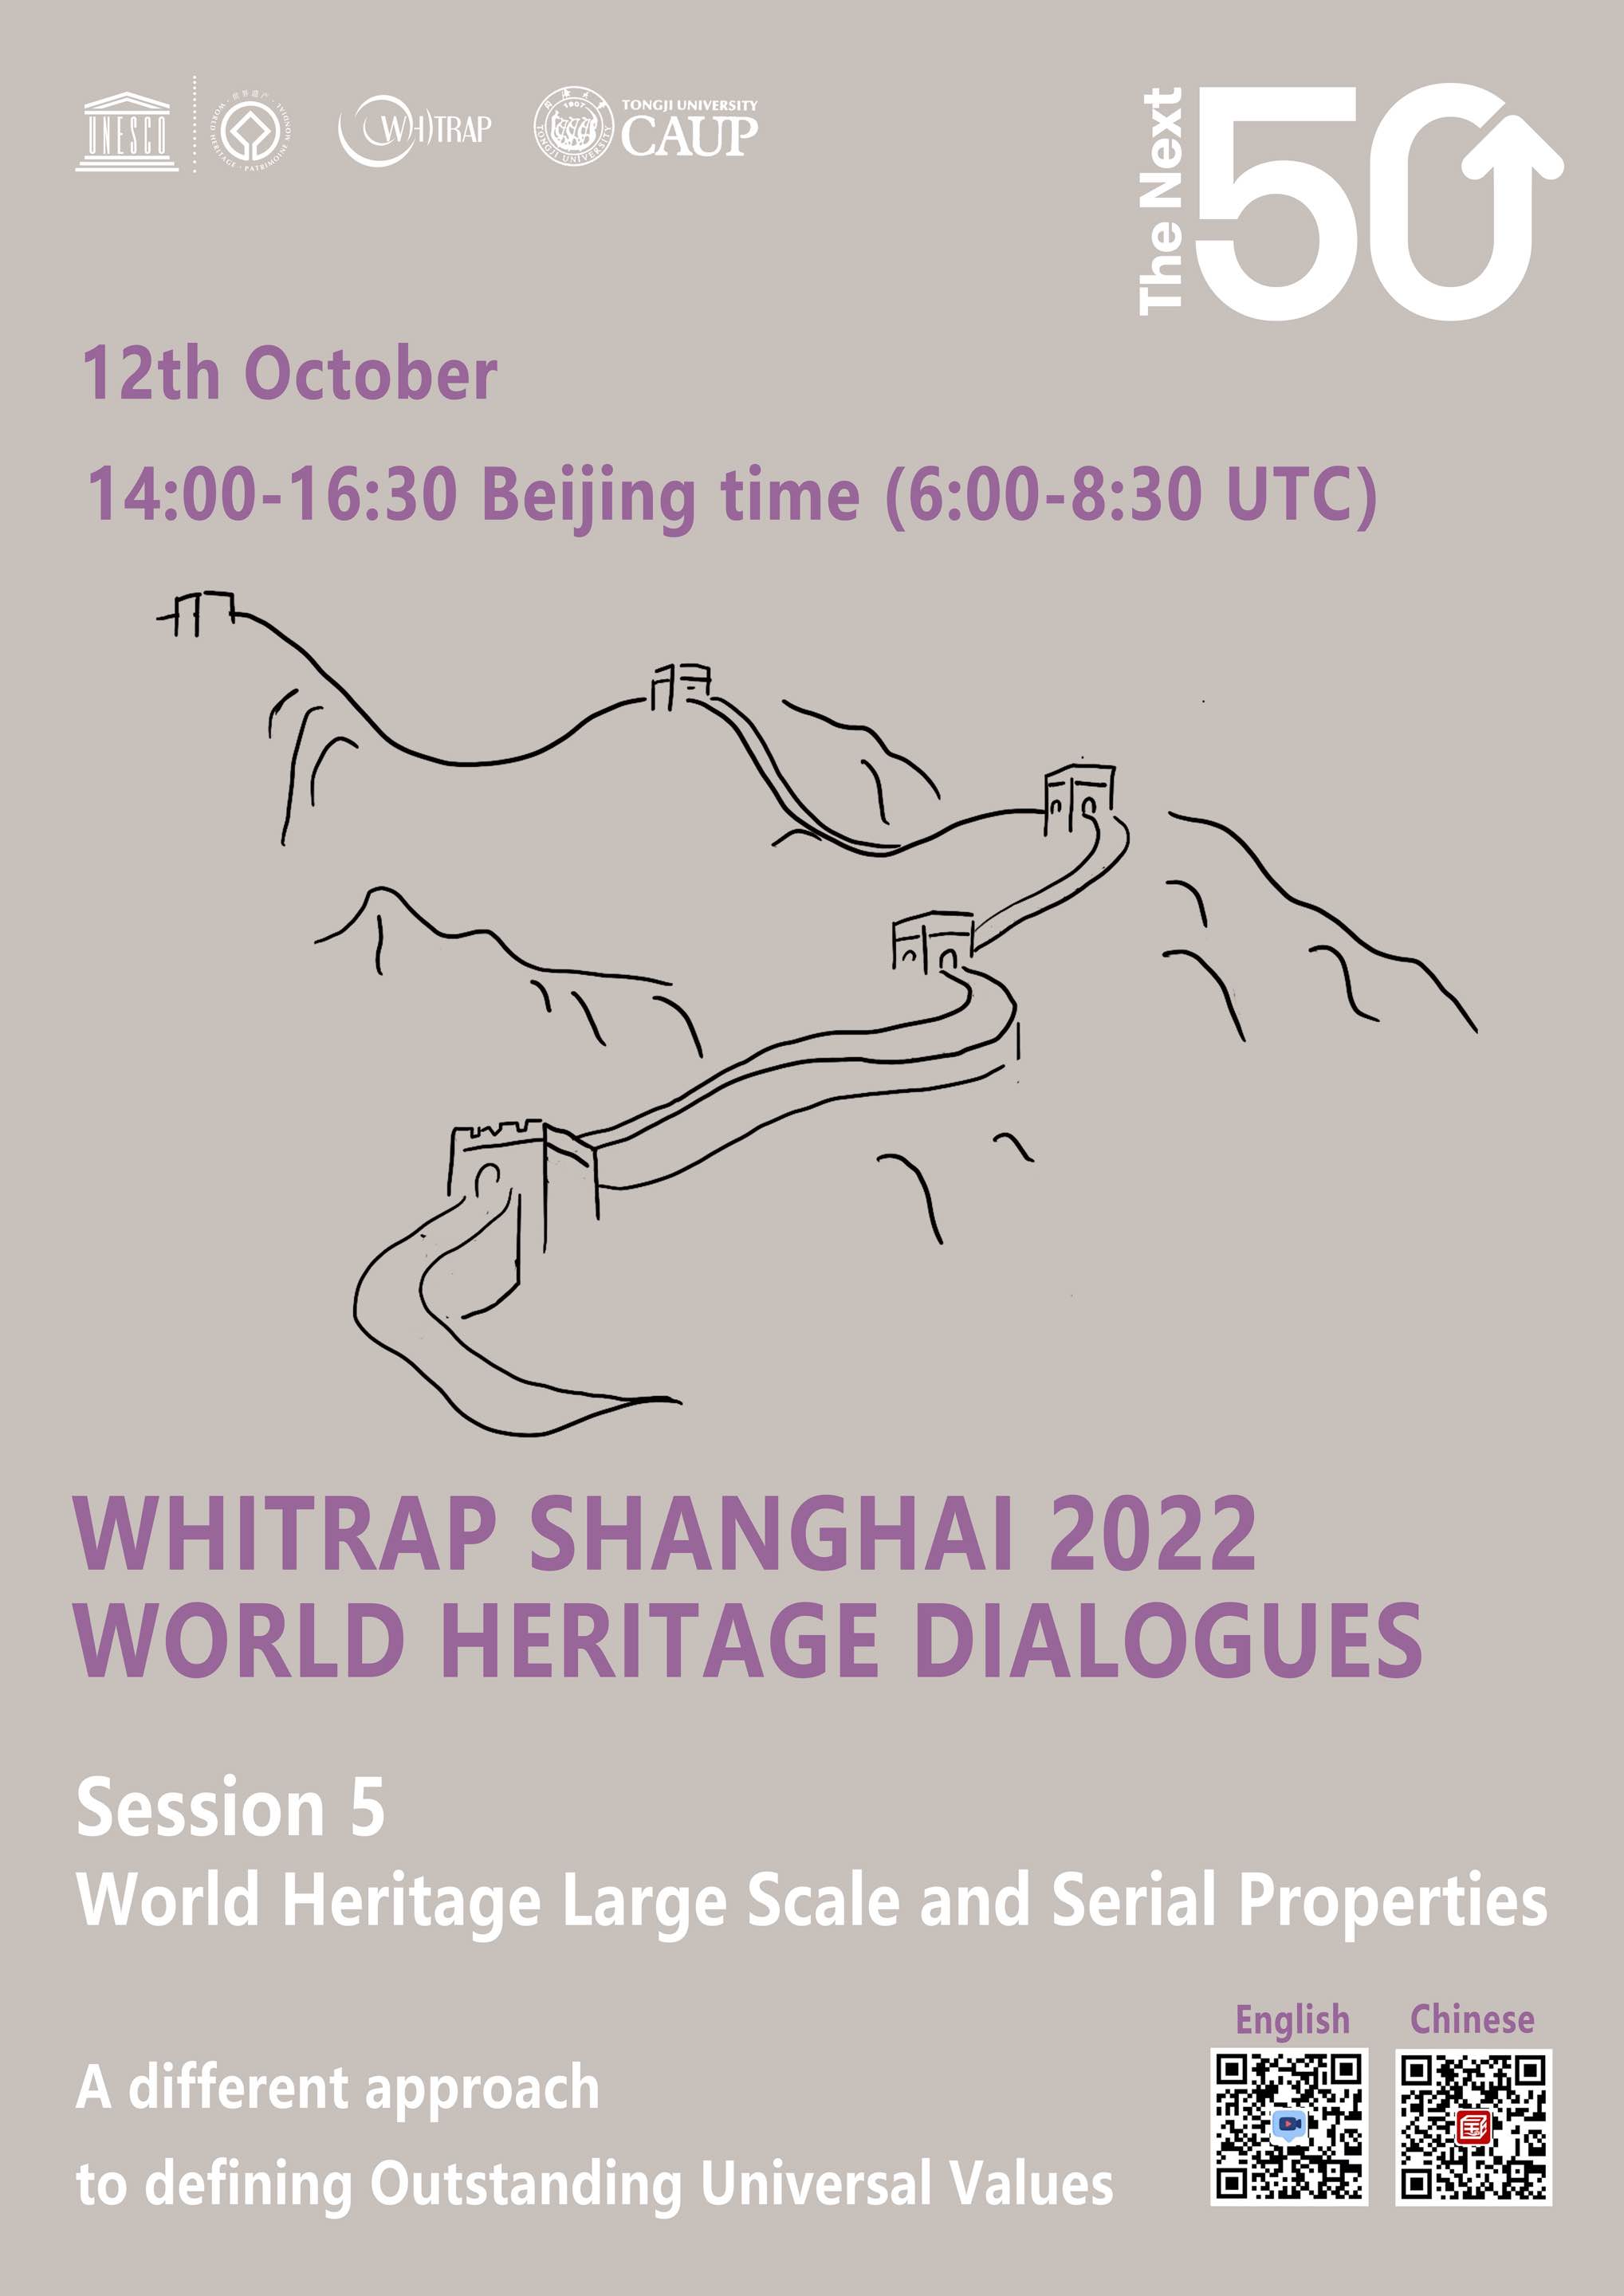 WHITRAP SHANGHAI 2022 WORLD HERITAGE DIALOGUES